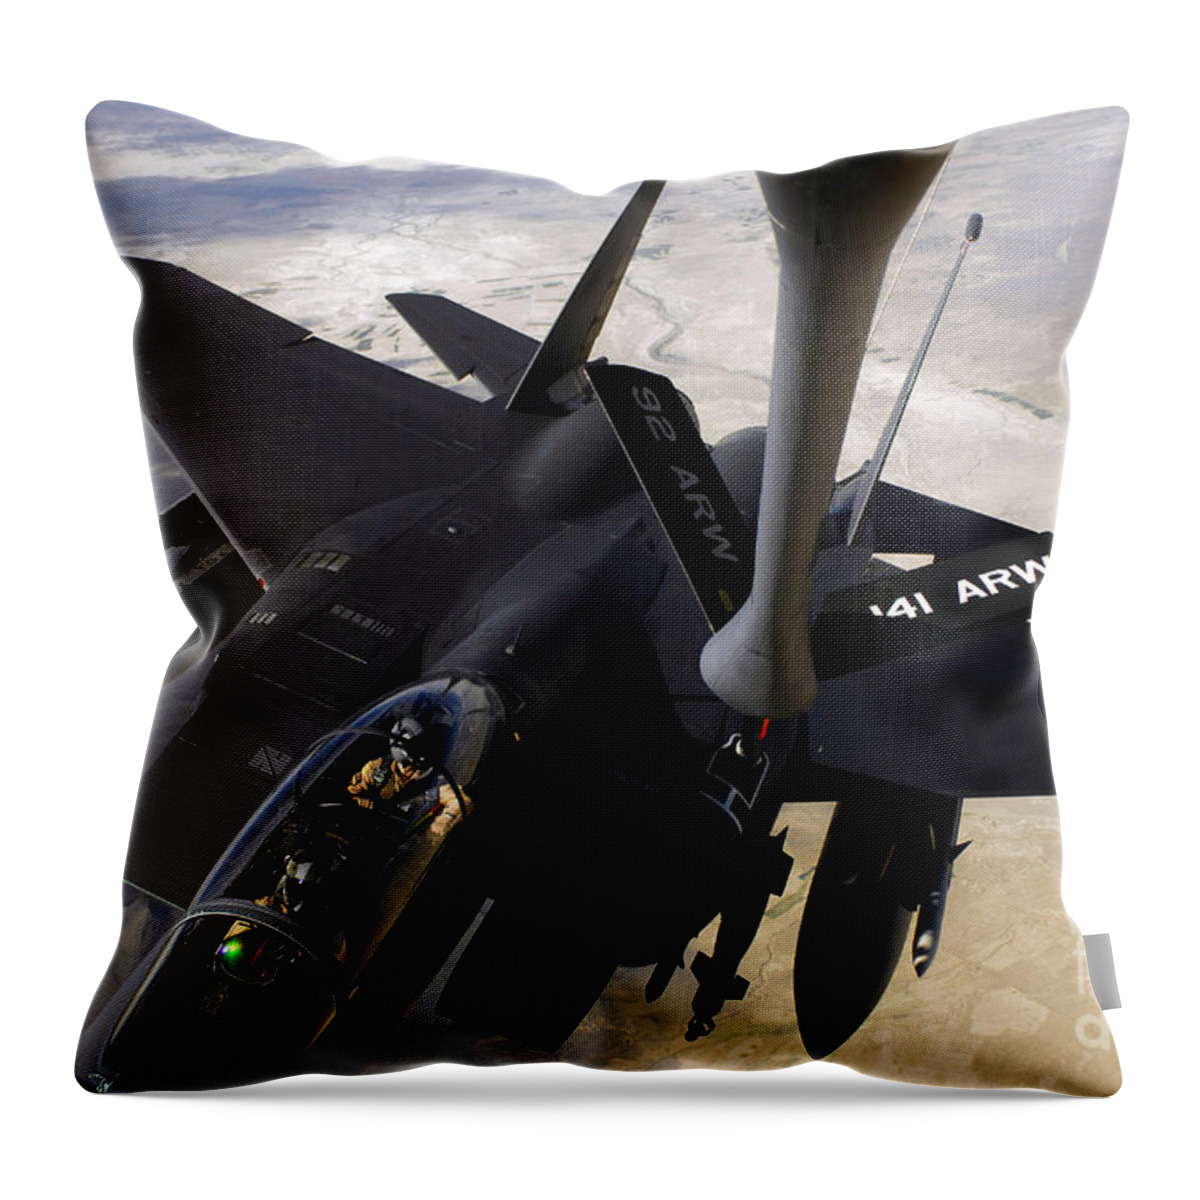 Canopy Throw Pillow featuring the photograph An F-15e Strike Eagle Aircraft Receives by Stocktrek Images